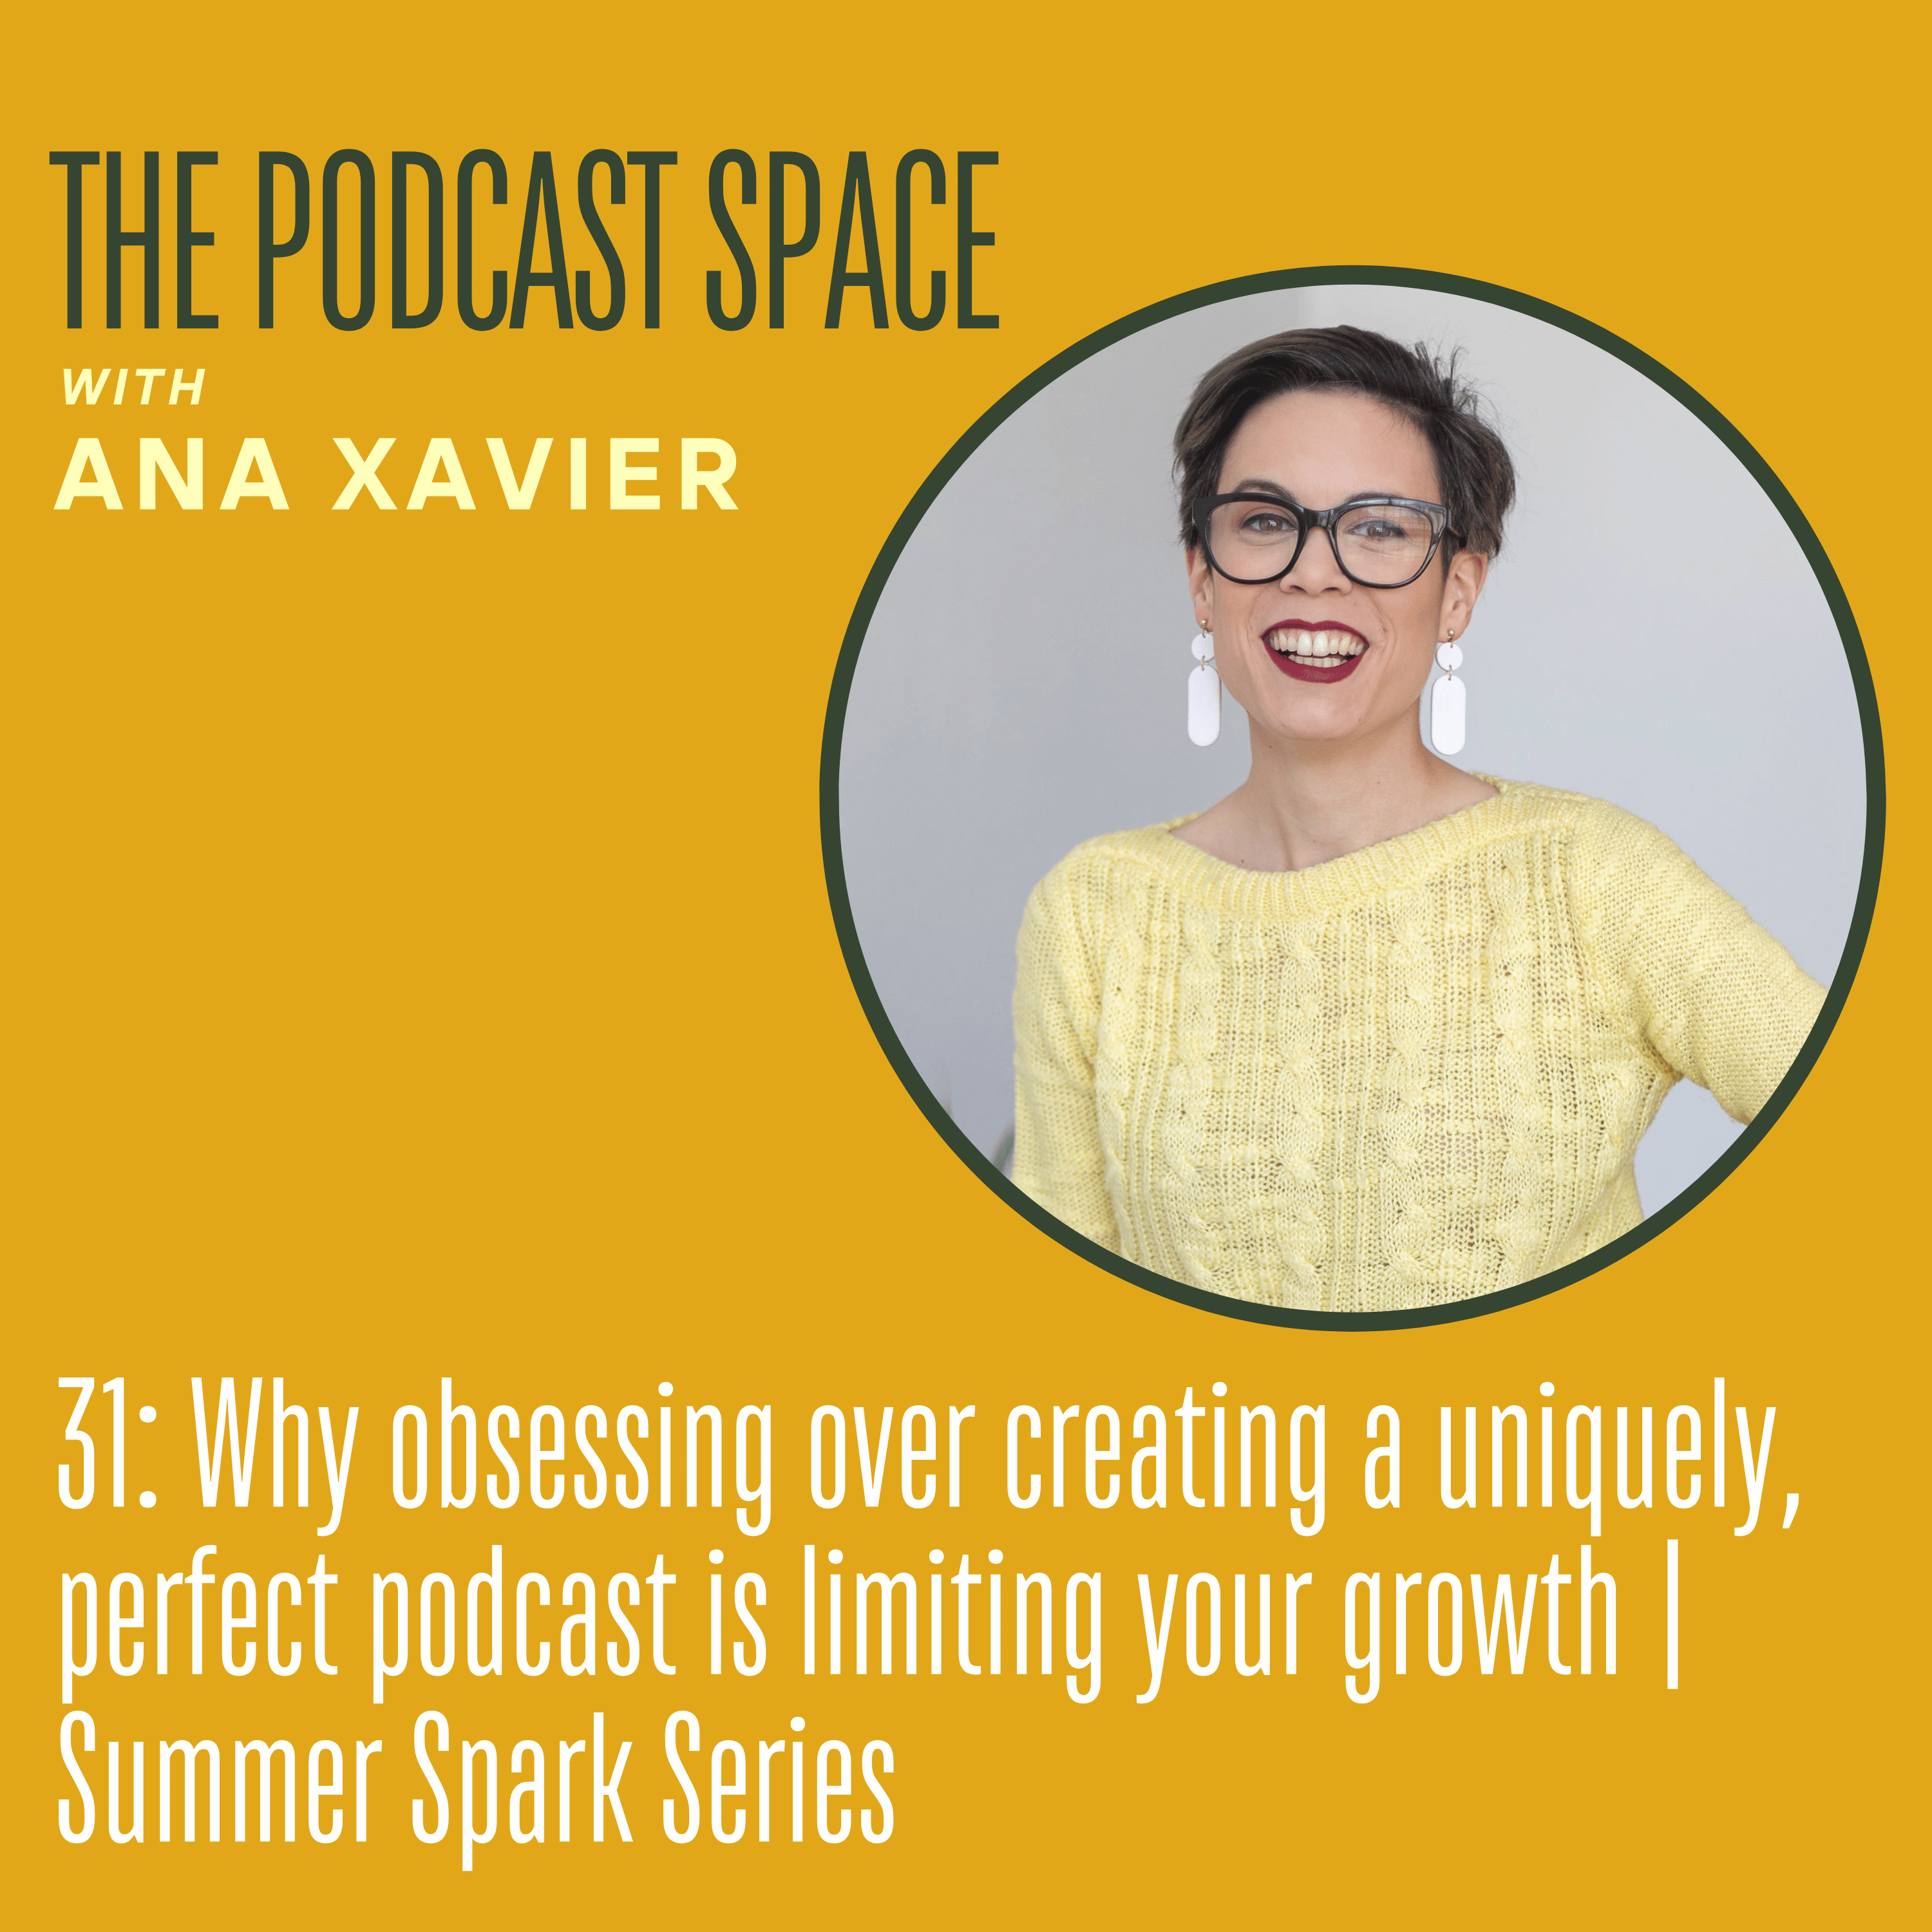 31. Why obsessing over creating a unique, perfect podcast is limiting your growth: Summer Spark Series